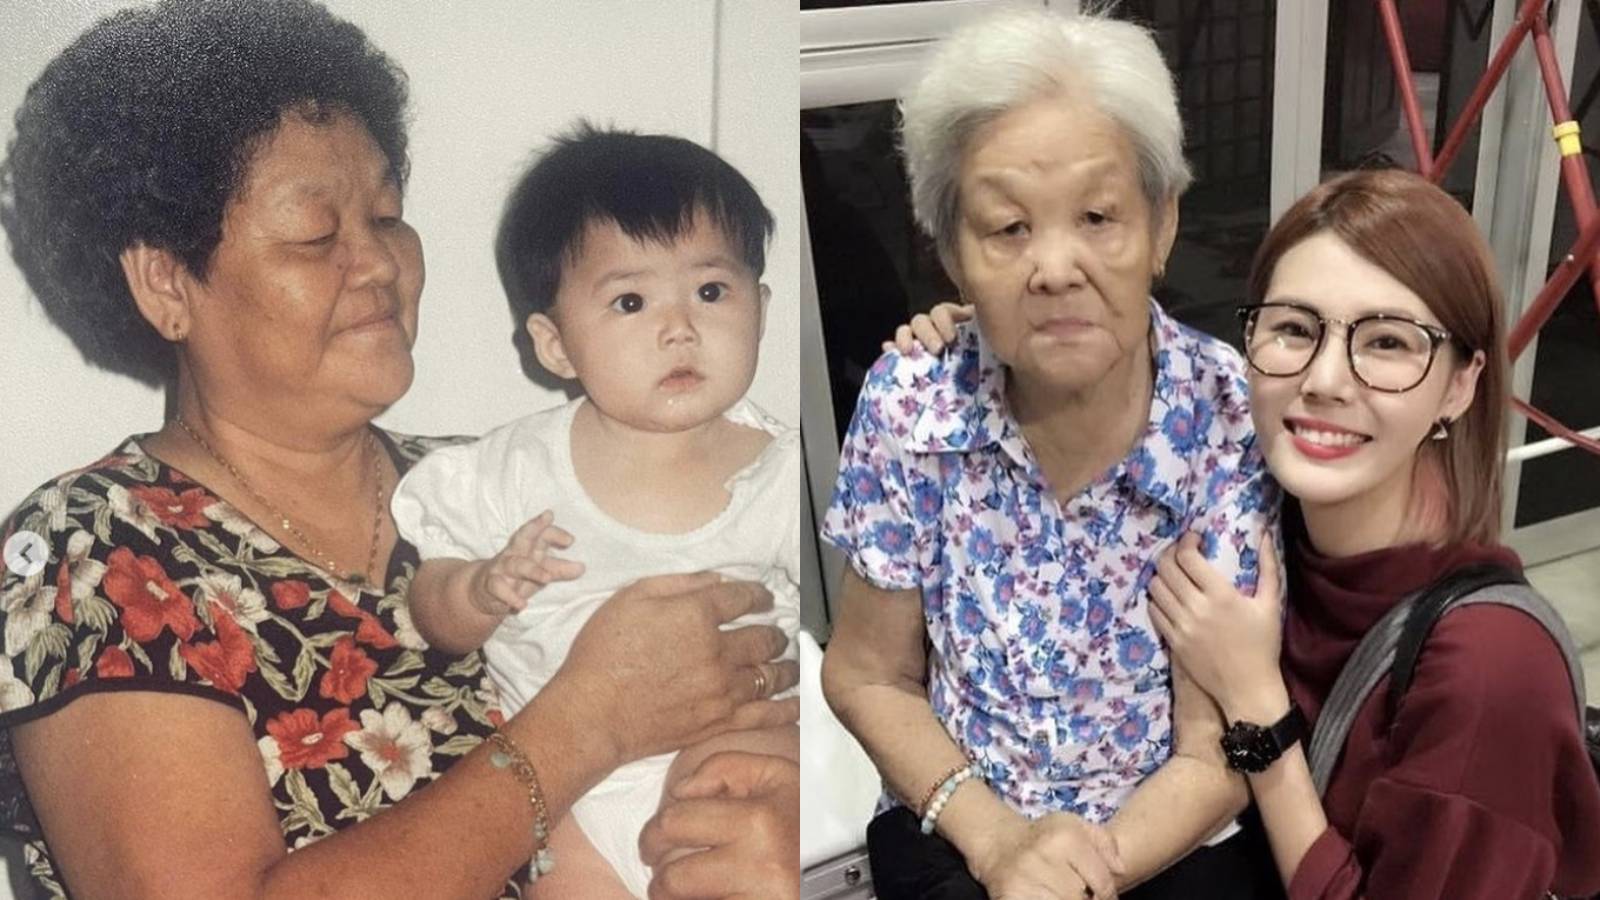 Carrie Wong Mourns Death Of Grandma, Whom She Hasn’t Seen In 2 Years ’Cos Of COVID-19